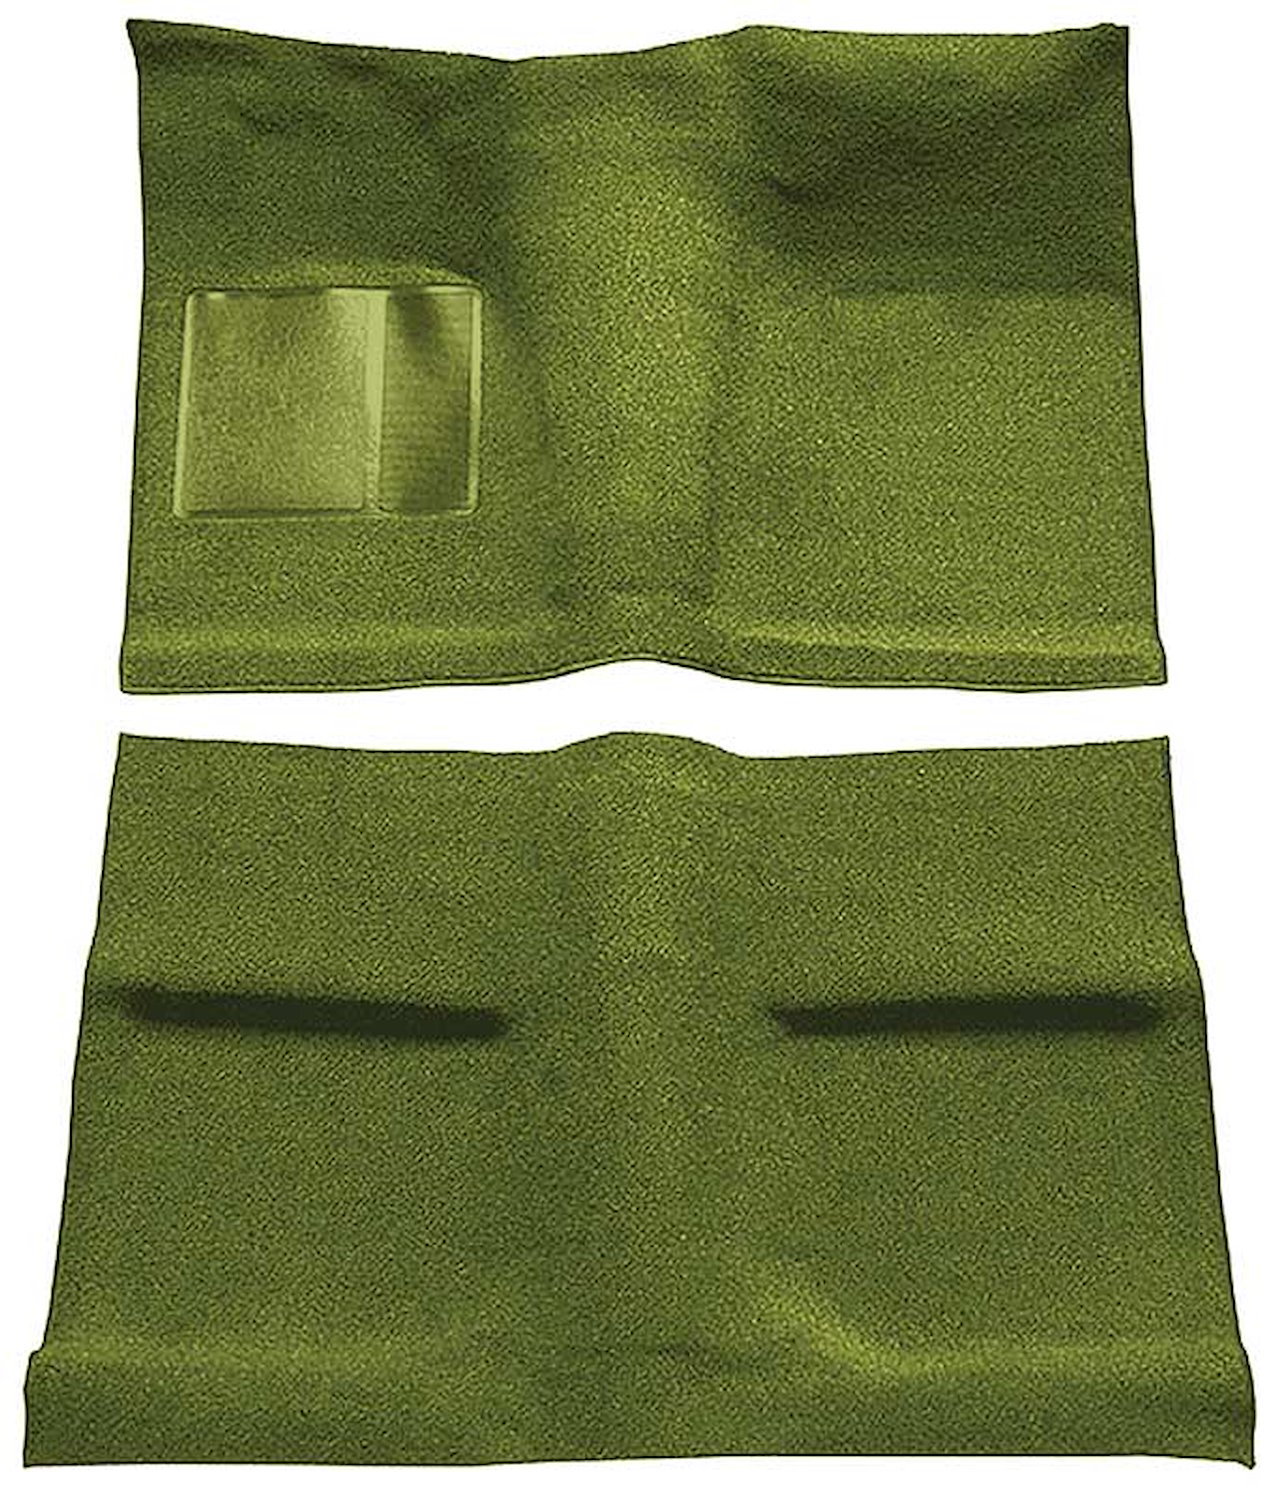 A4031B19 Passenger Area Nylon Loop Floor Carpet Set With Mass Backing 1964 Mustang Coupe; Moss Green